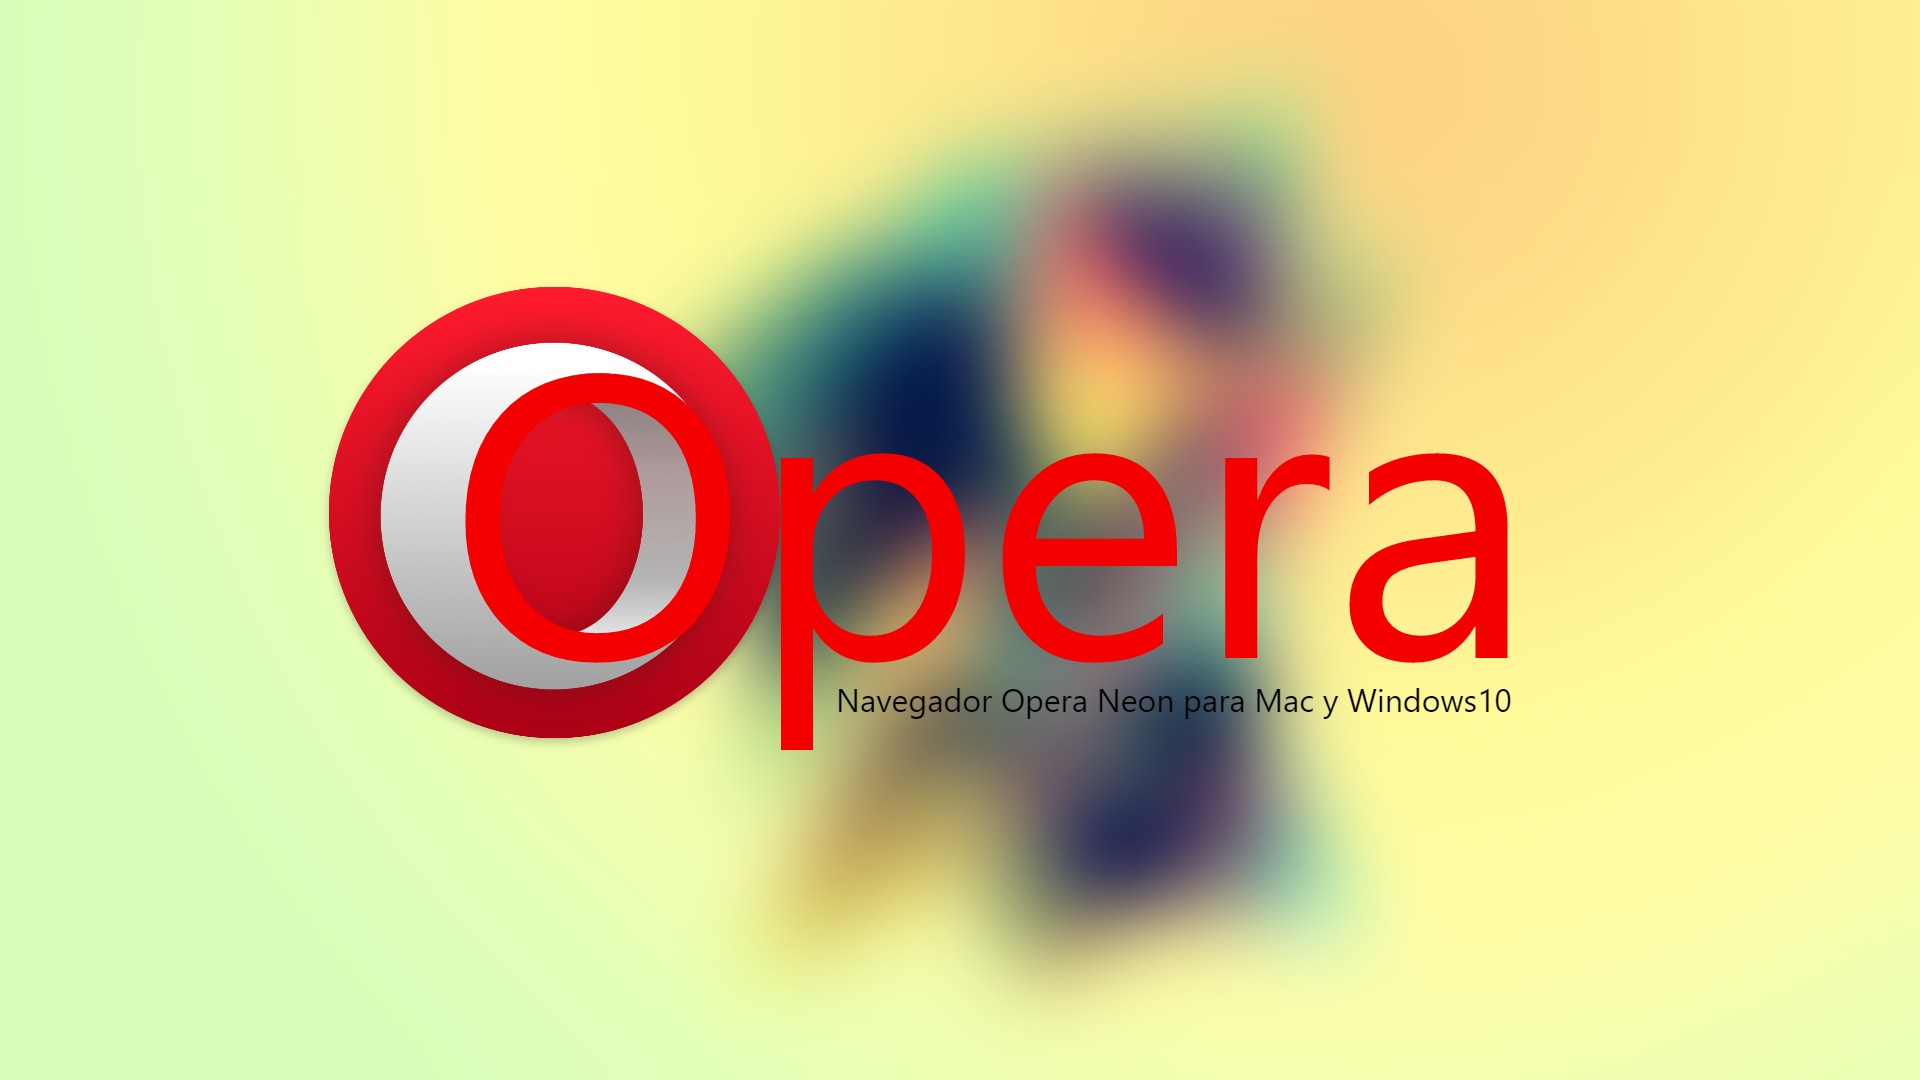 download opera browser for mac os 10.7.4